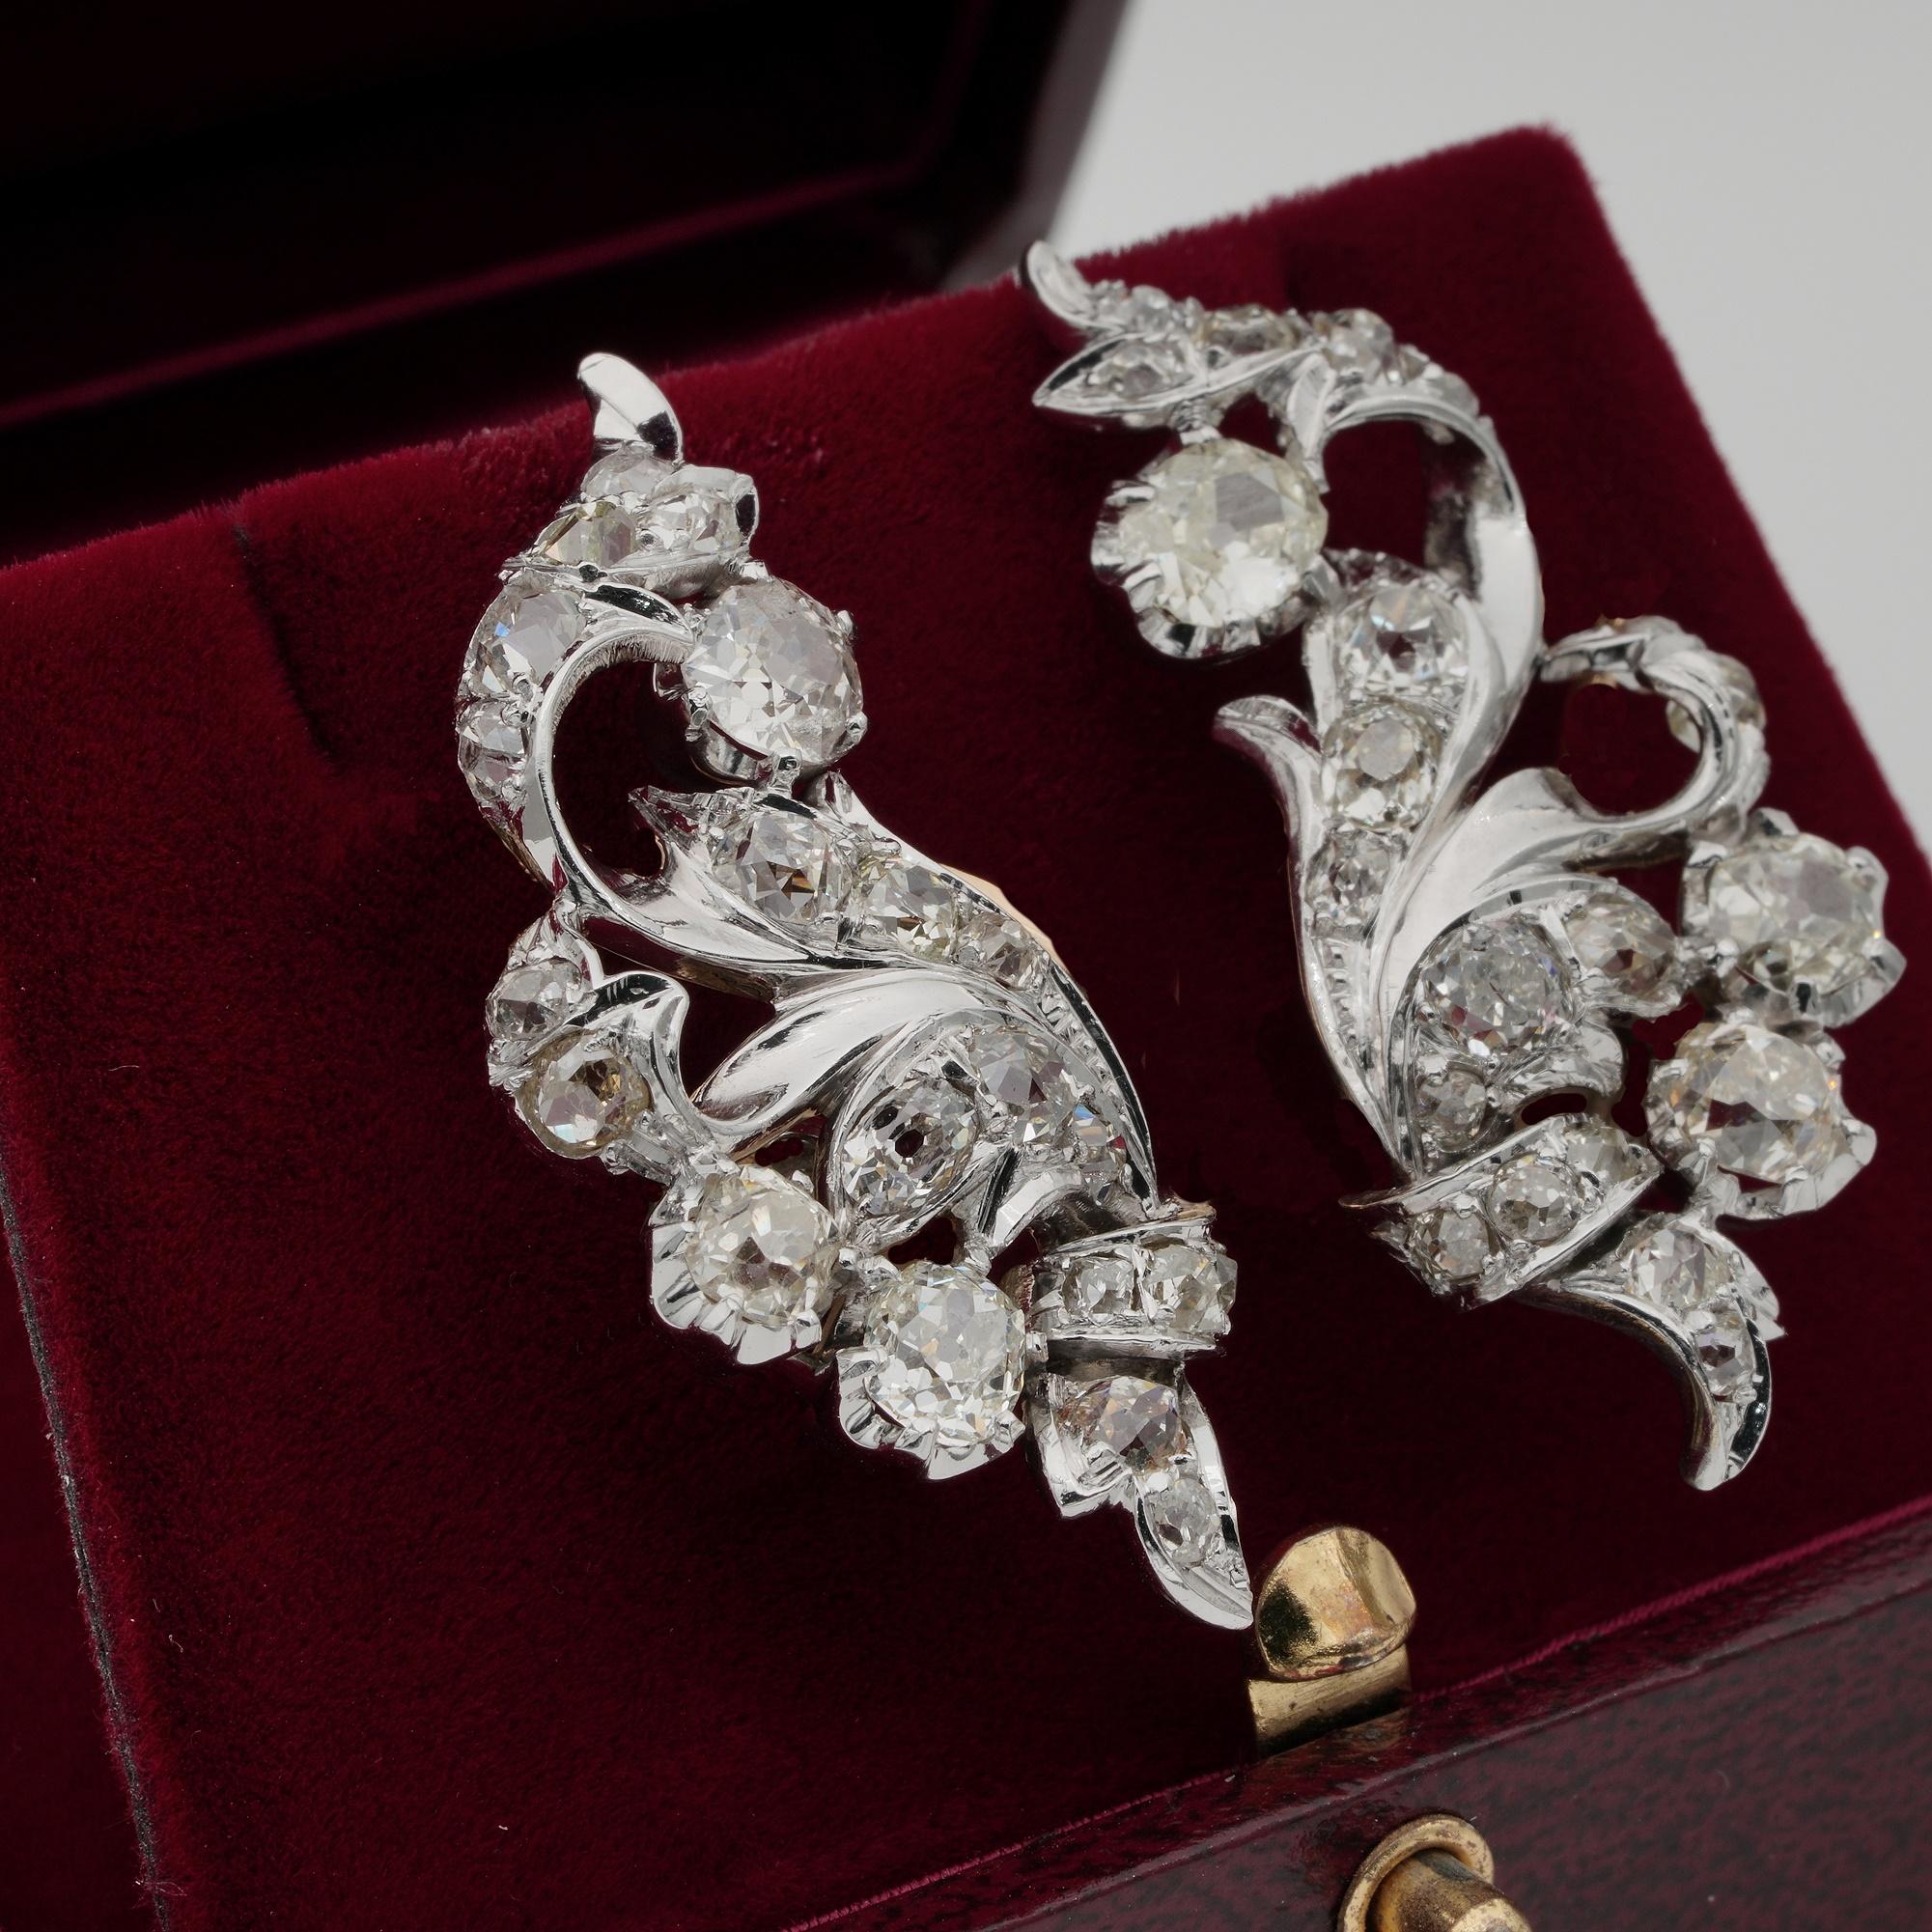 An impressive pair of late Art Deco Diamond spray lobe earrings, 1930 ca
Superb workmanship of the ear rendered of solid Platinum and 18 KT backs
Made for pierced ears with large clip on to fit the lobe
The stunning nature inspired  spray design is